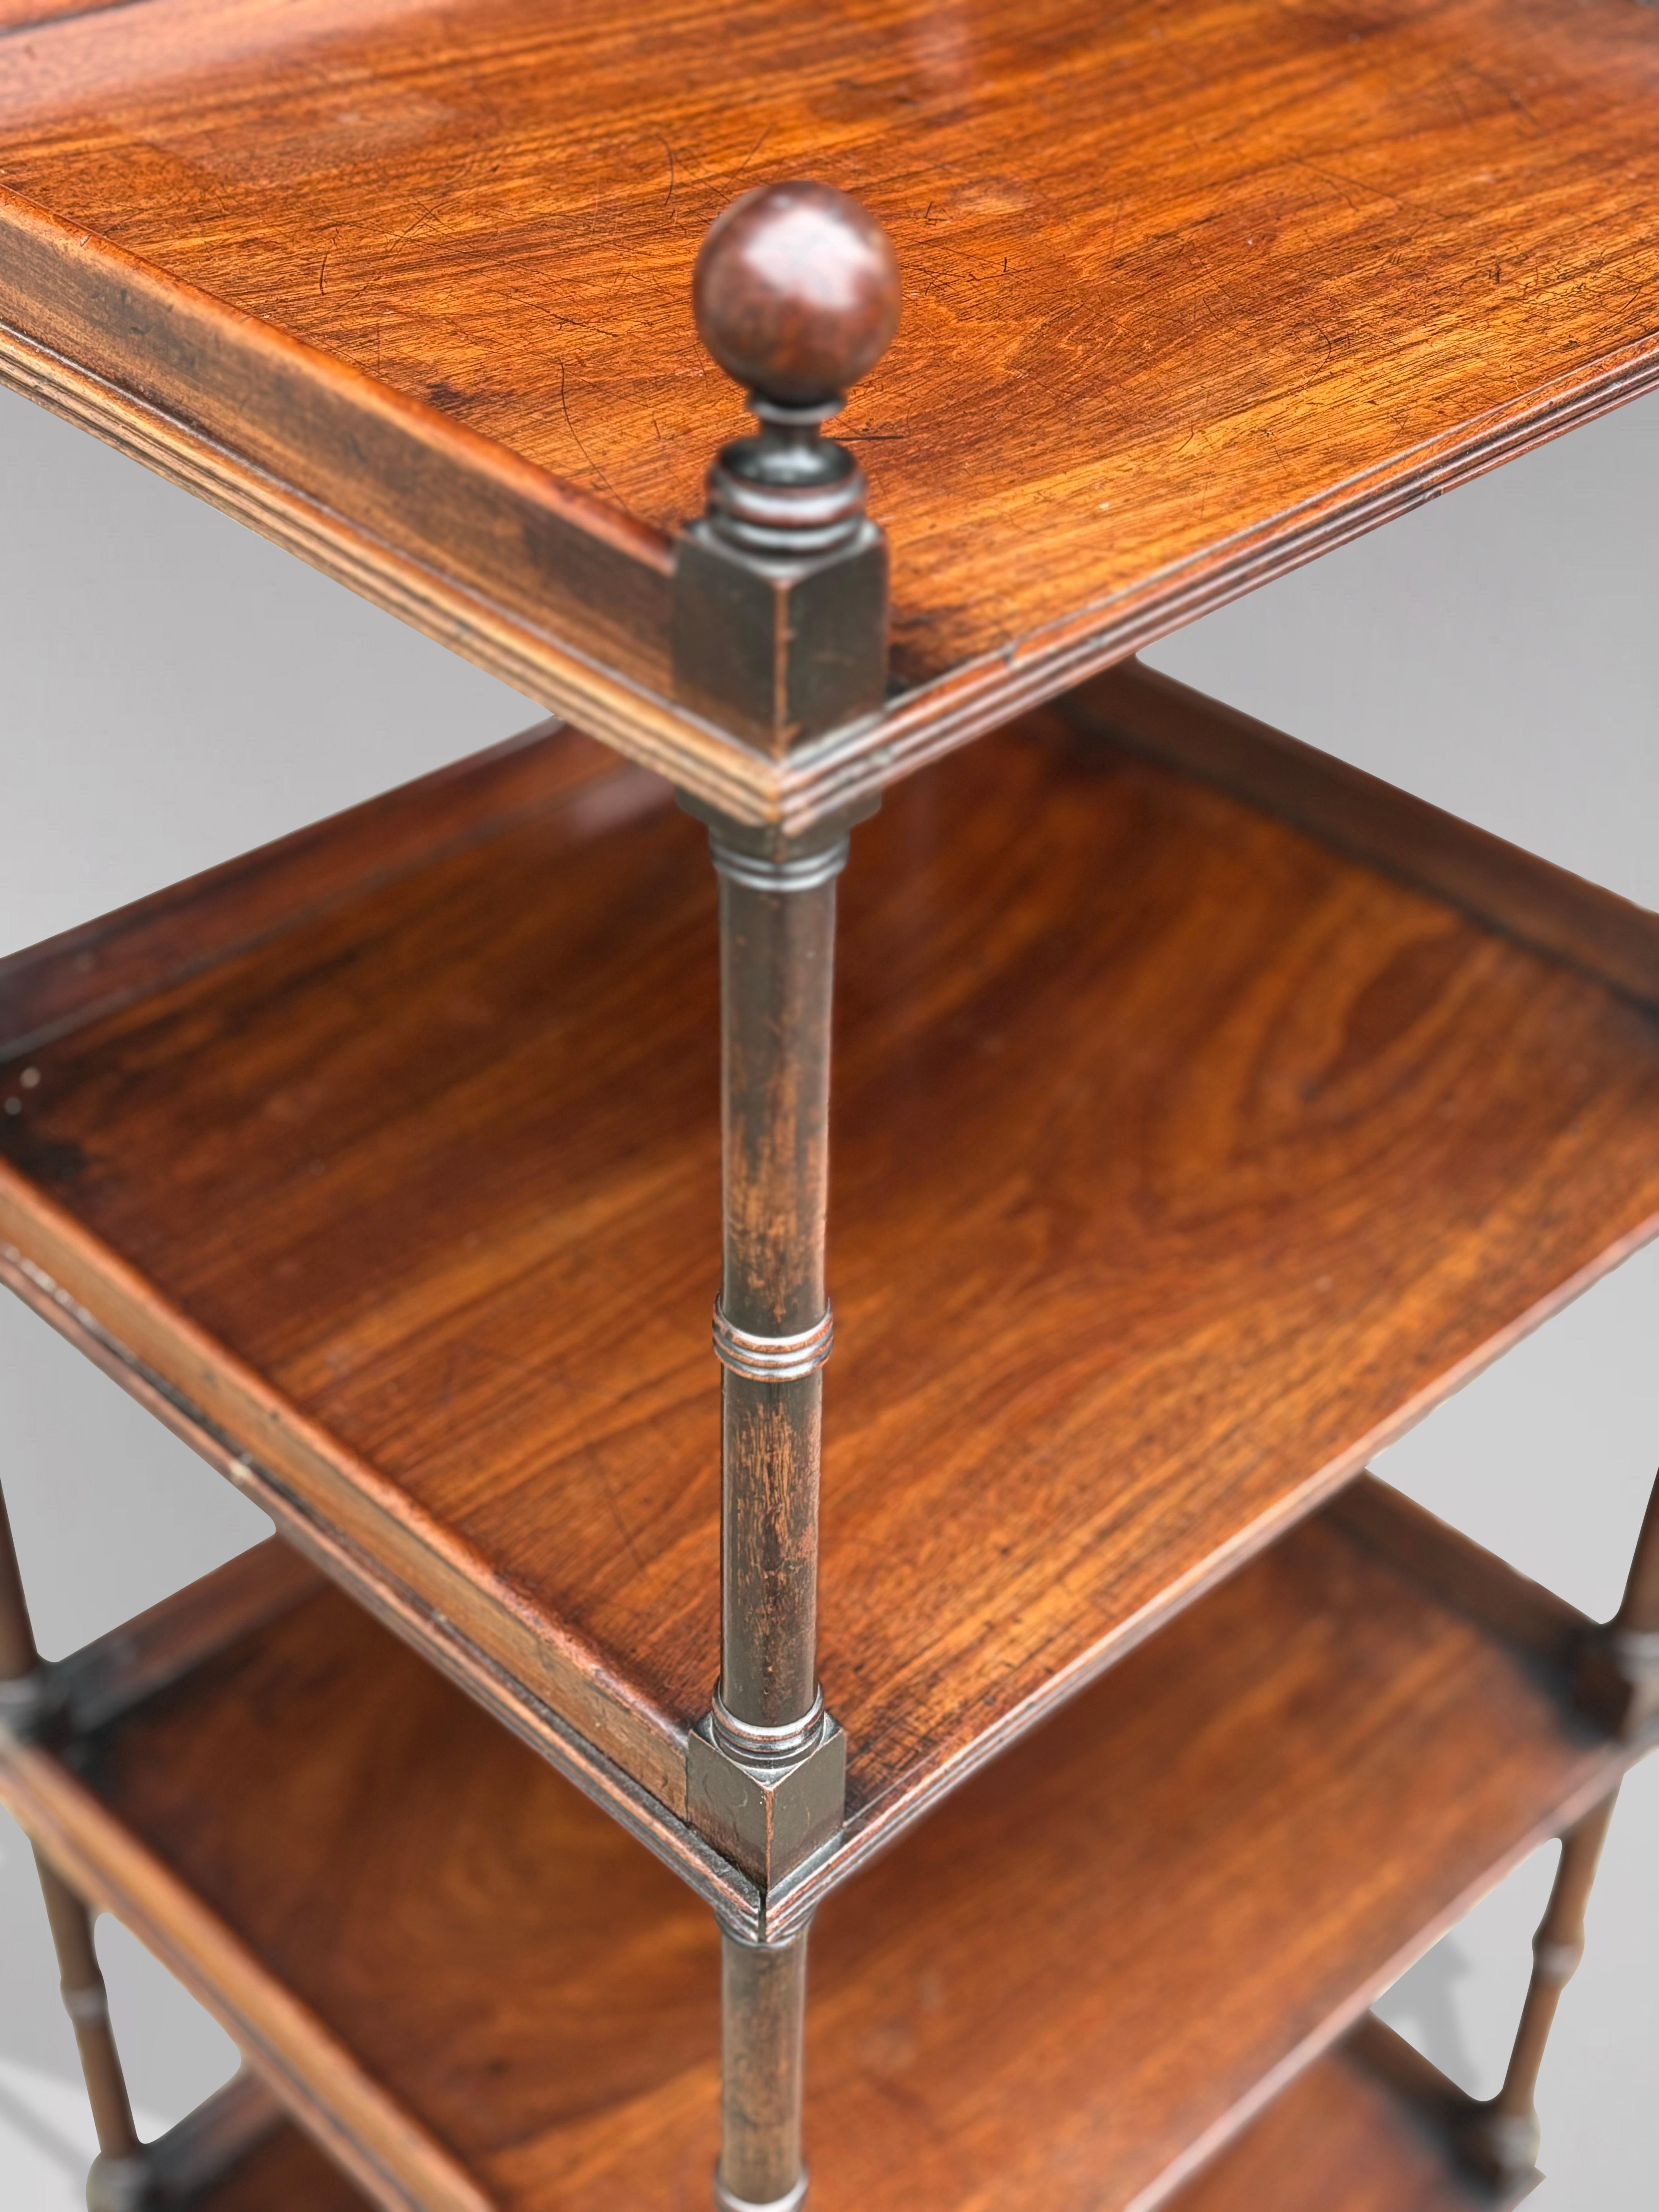 Polished 19th Century Regency Period Mahogany Whatnot or Display Stand For Sale